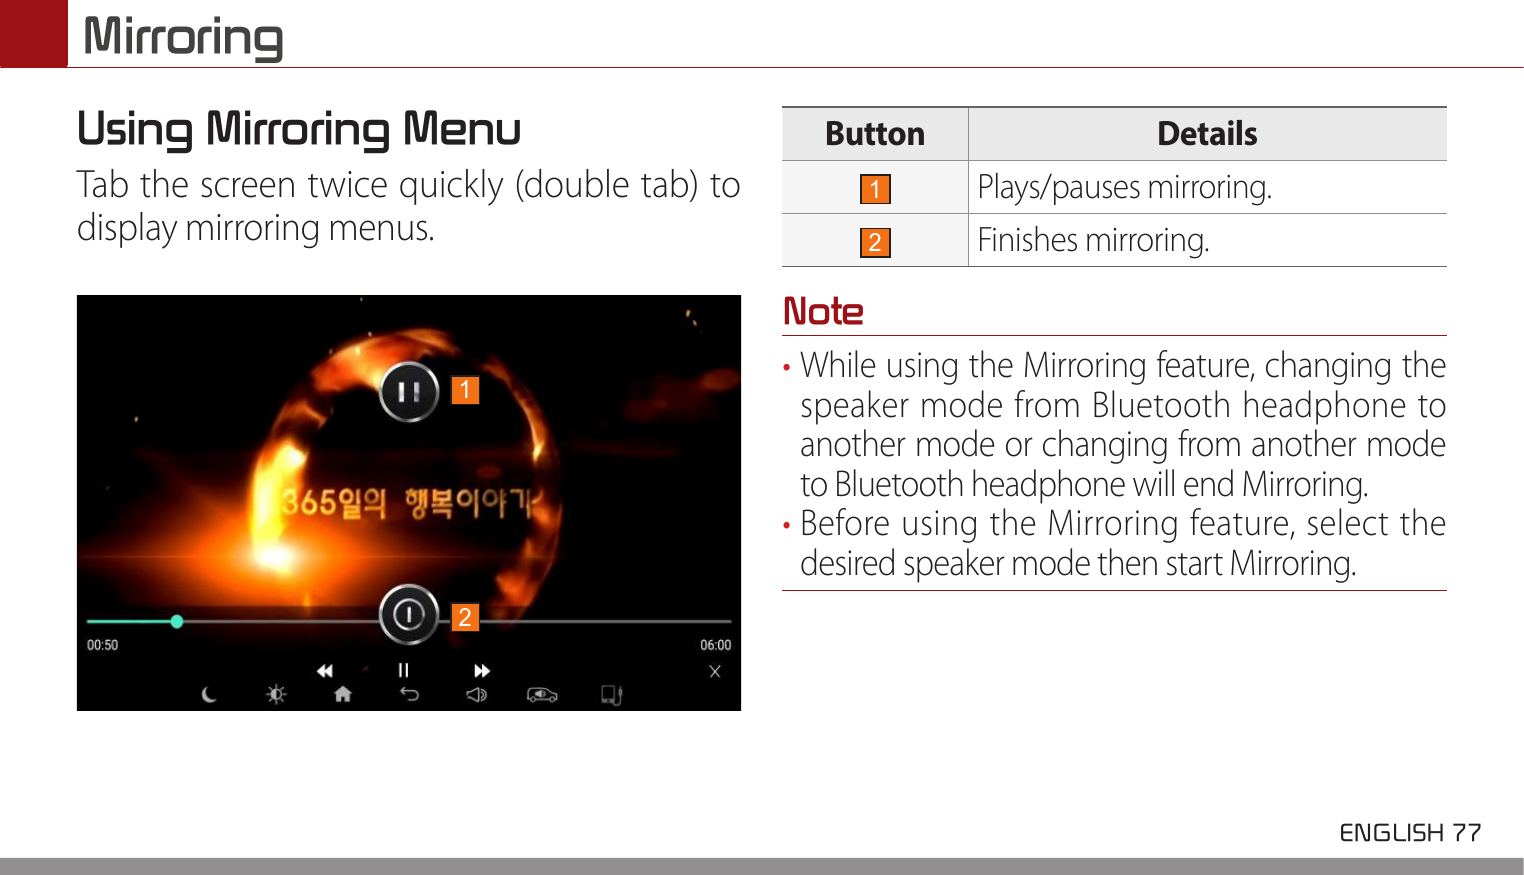  ENGLISH 77 MirroringUsing Mirroring MenuTab the screen twice quickly (double tab) to display mirroring menus.Button Details1Plays/pauses mirroring.2Finishes mirroring.Note• While using the Mirroring feature, changing the speaker mode from Bluetooth headphone to another mode or changing from another mode to Bluetooth headphone will end Mirroring.• Before using the Mirroring feature, select the desired speaker mode then start Mirroring.12